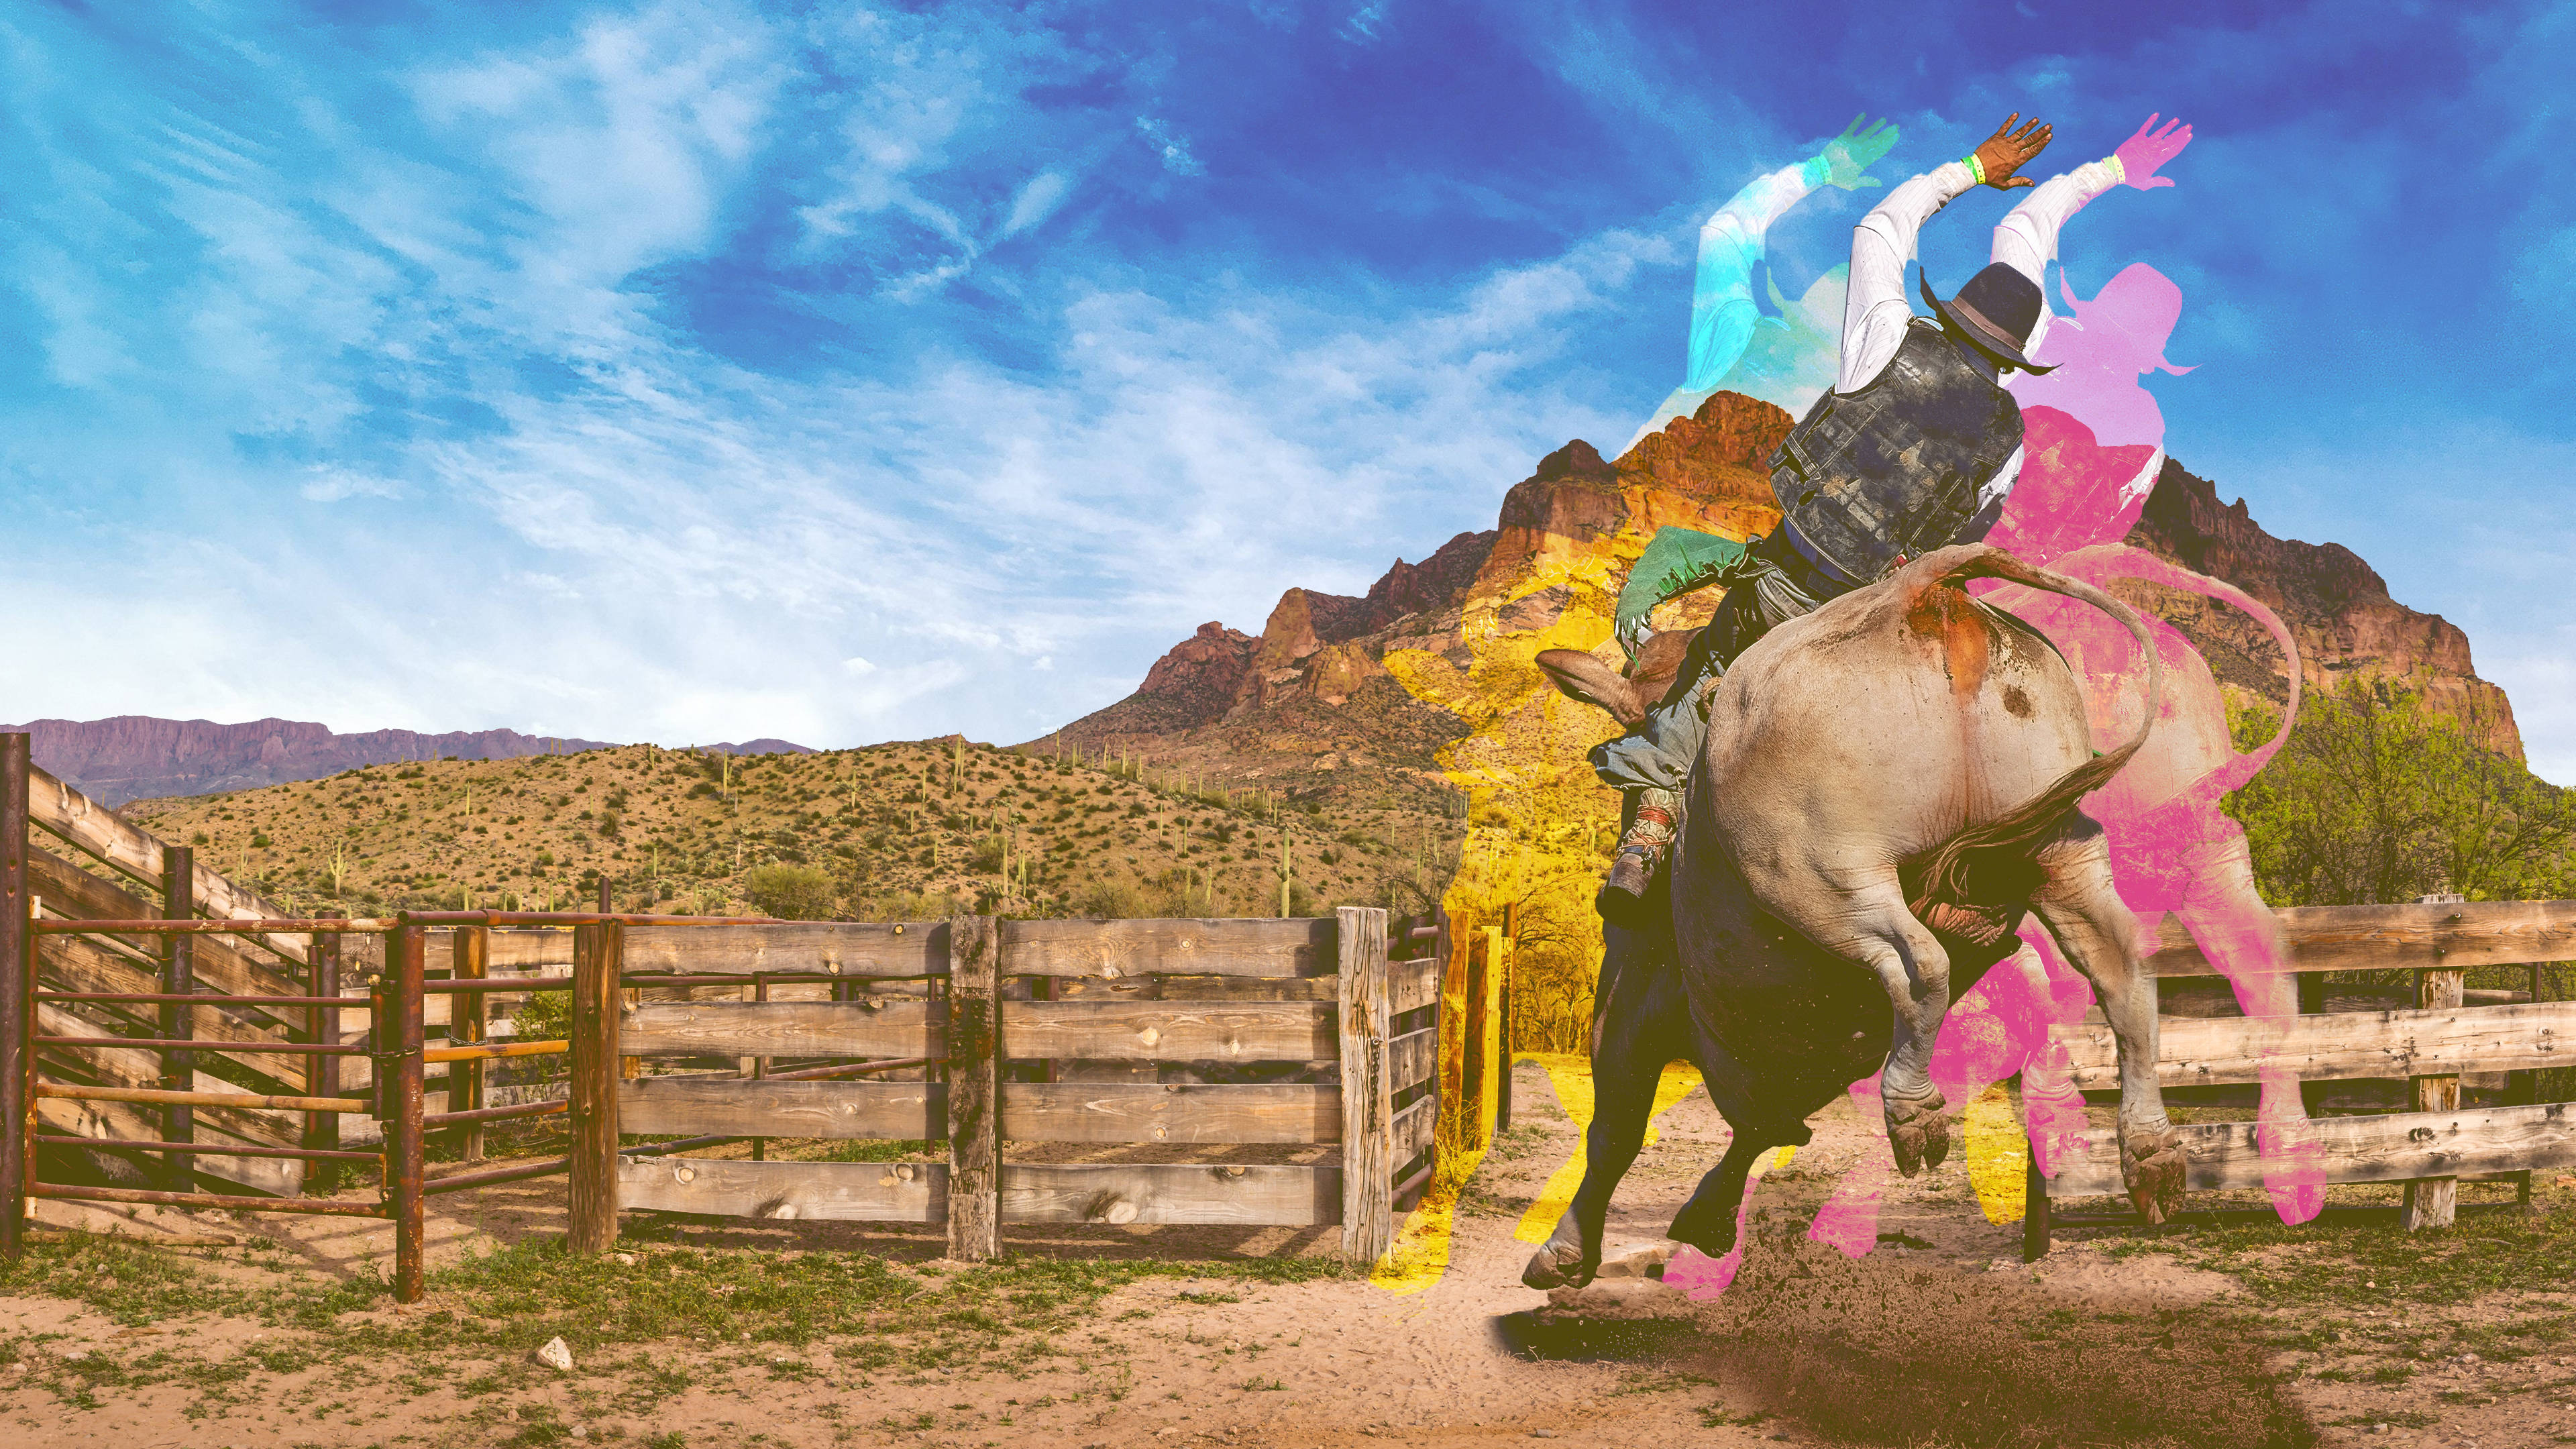 Cowboy Rodeo Aesthetic Wallpaper